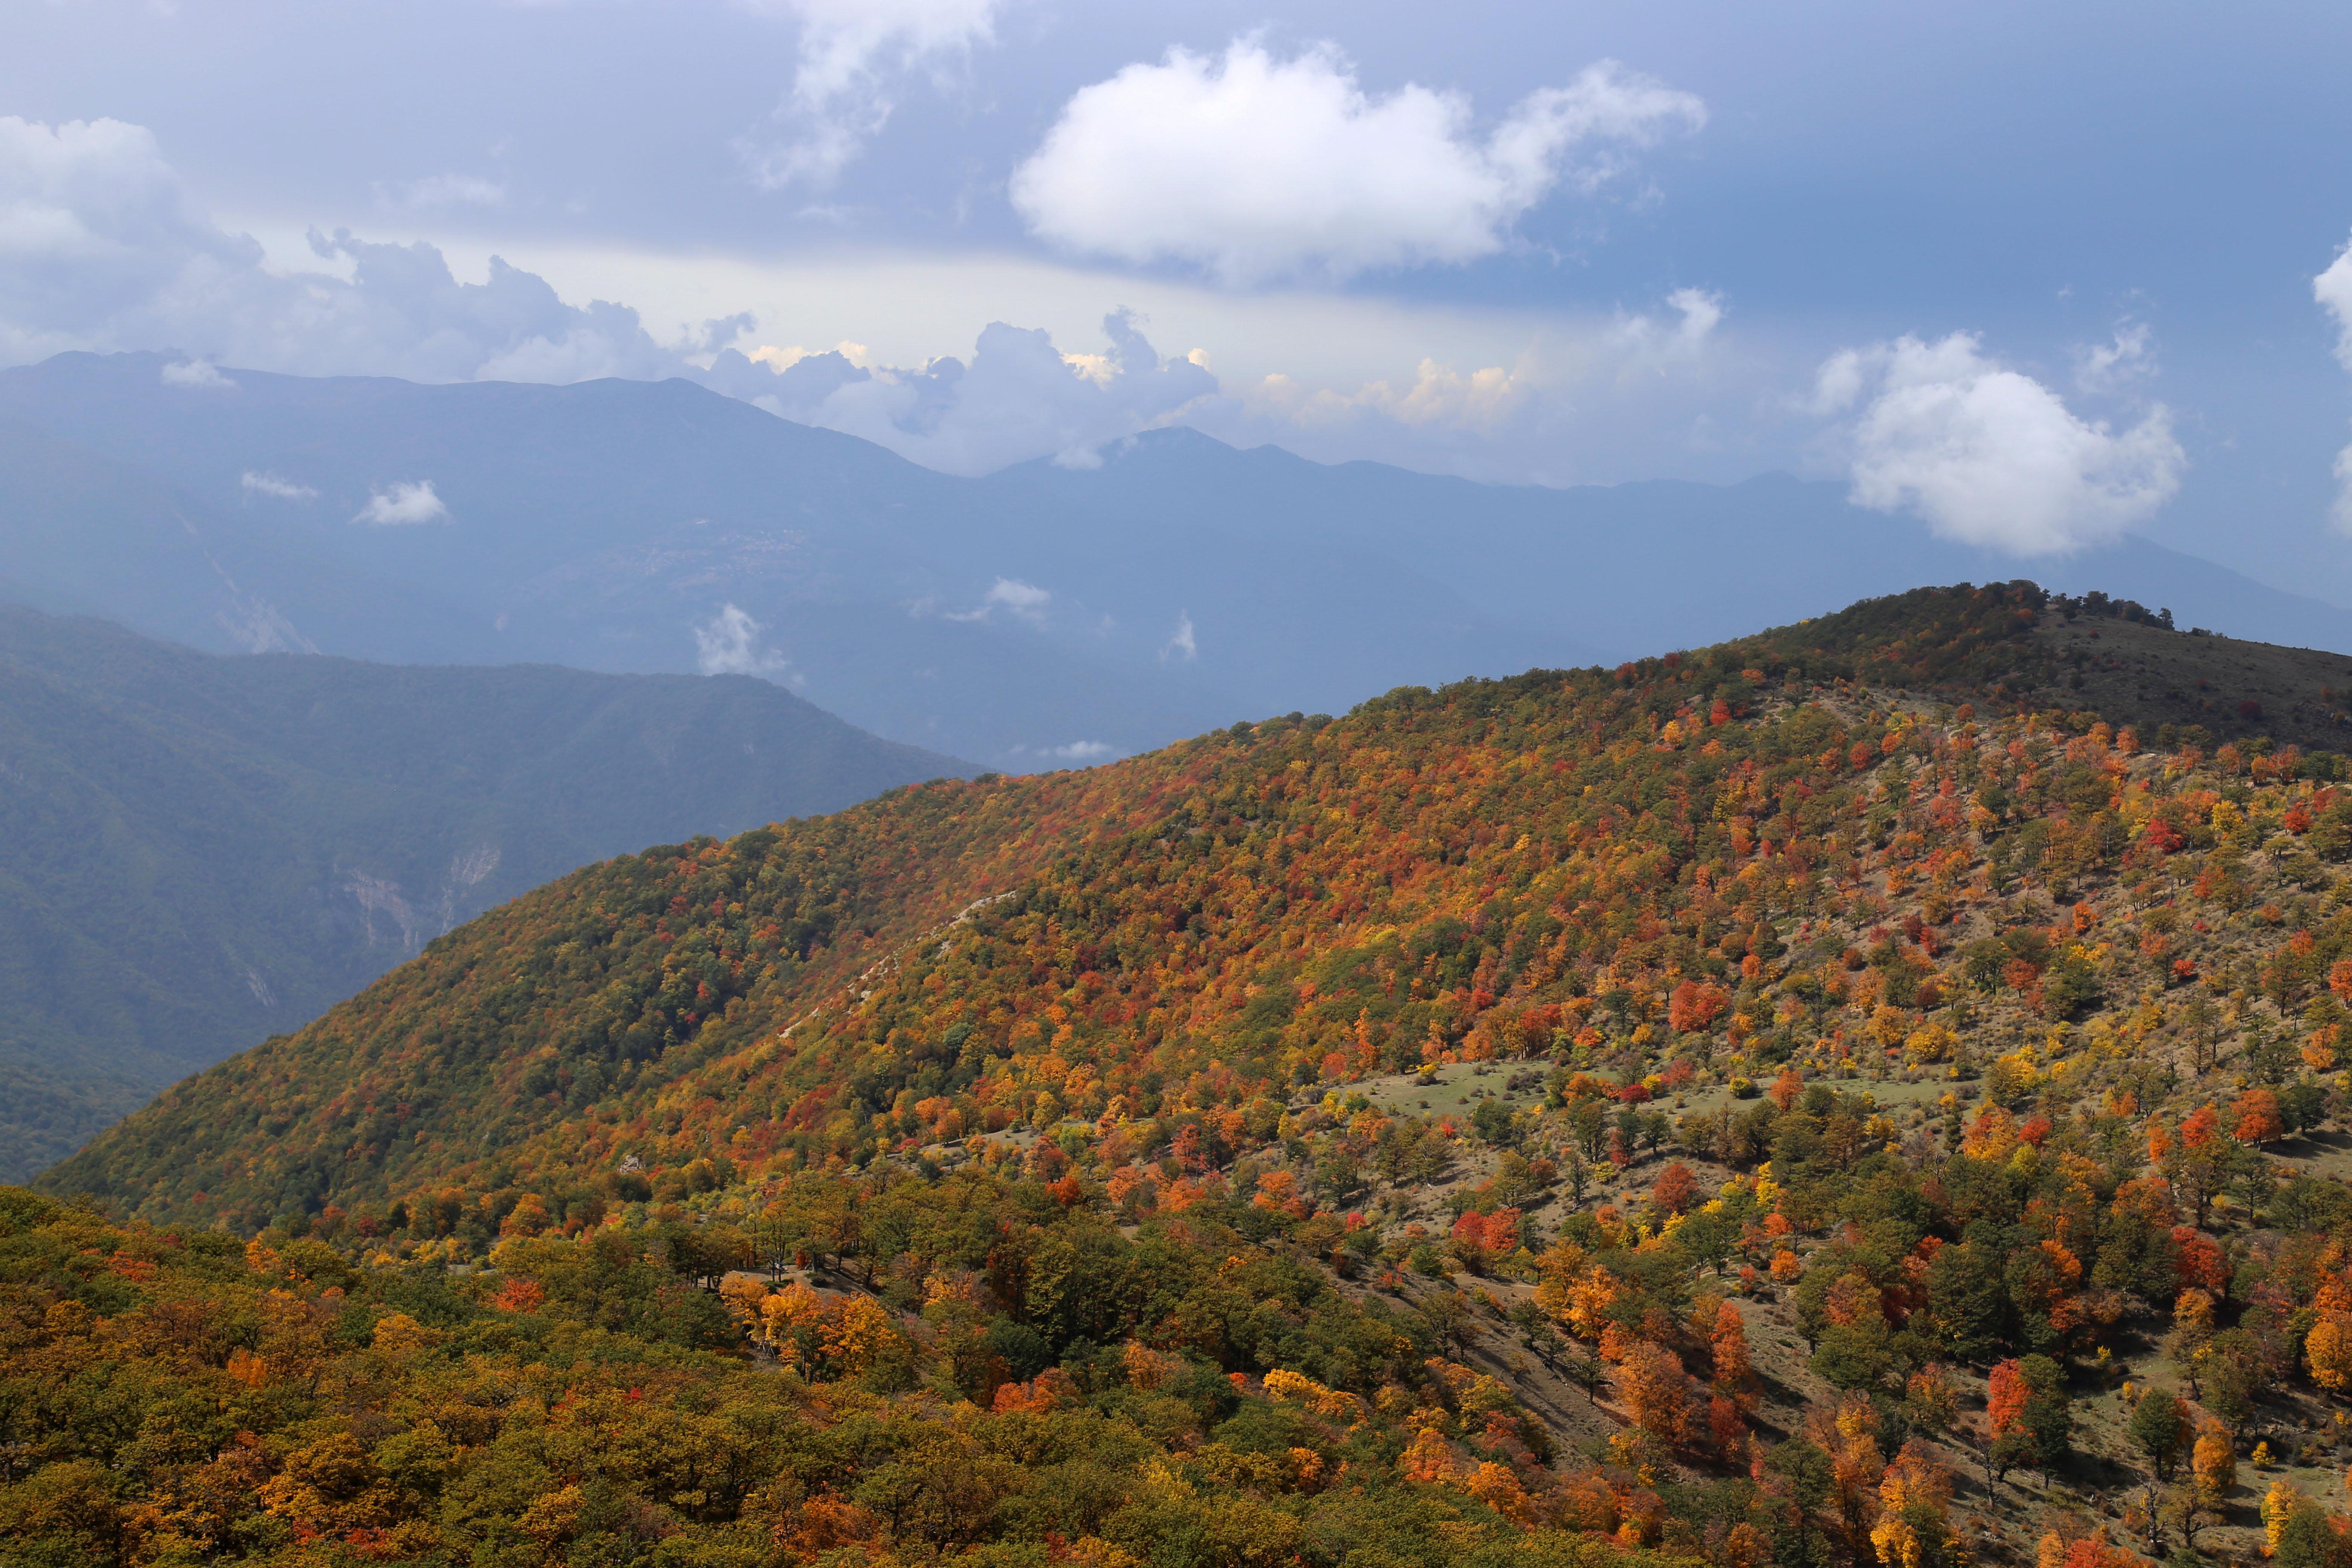 Fall is a stunning time to visit the area to see the folliage change colors © Ata Farzam / Shutterstock